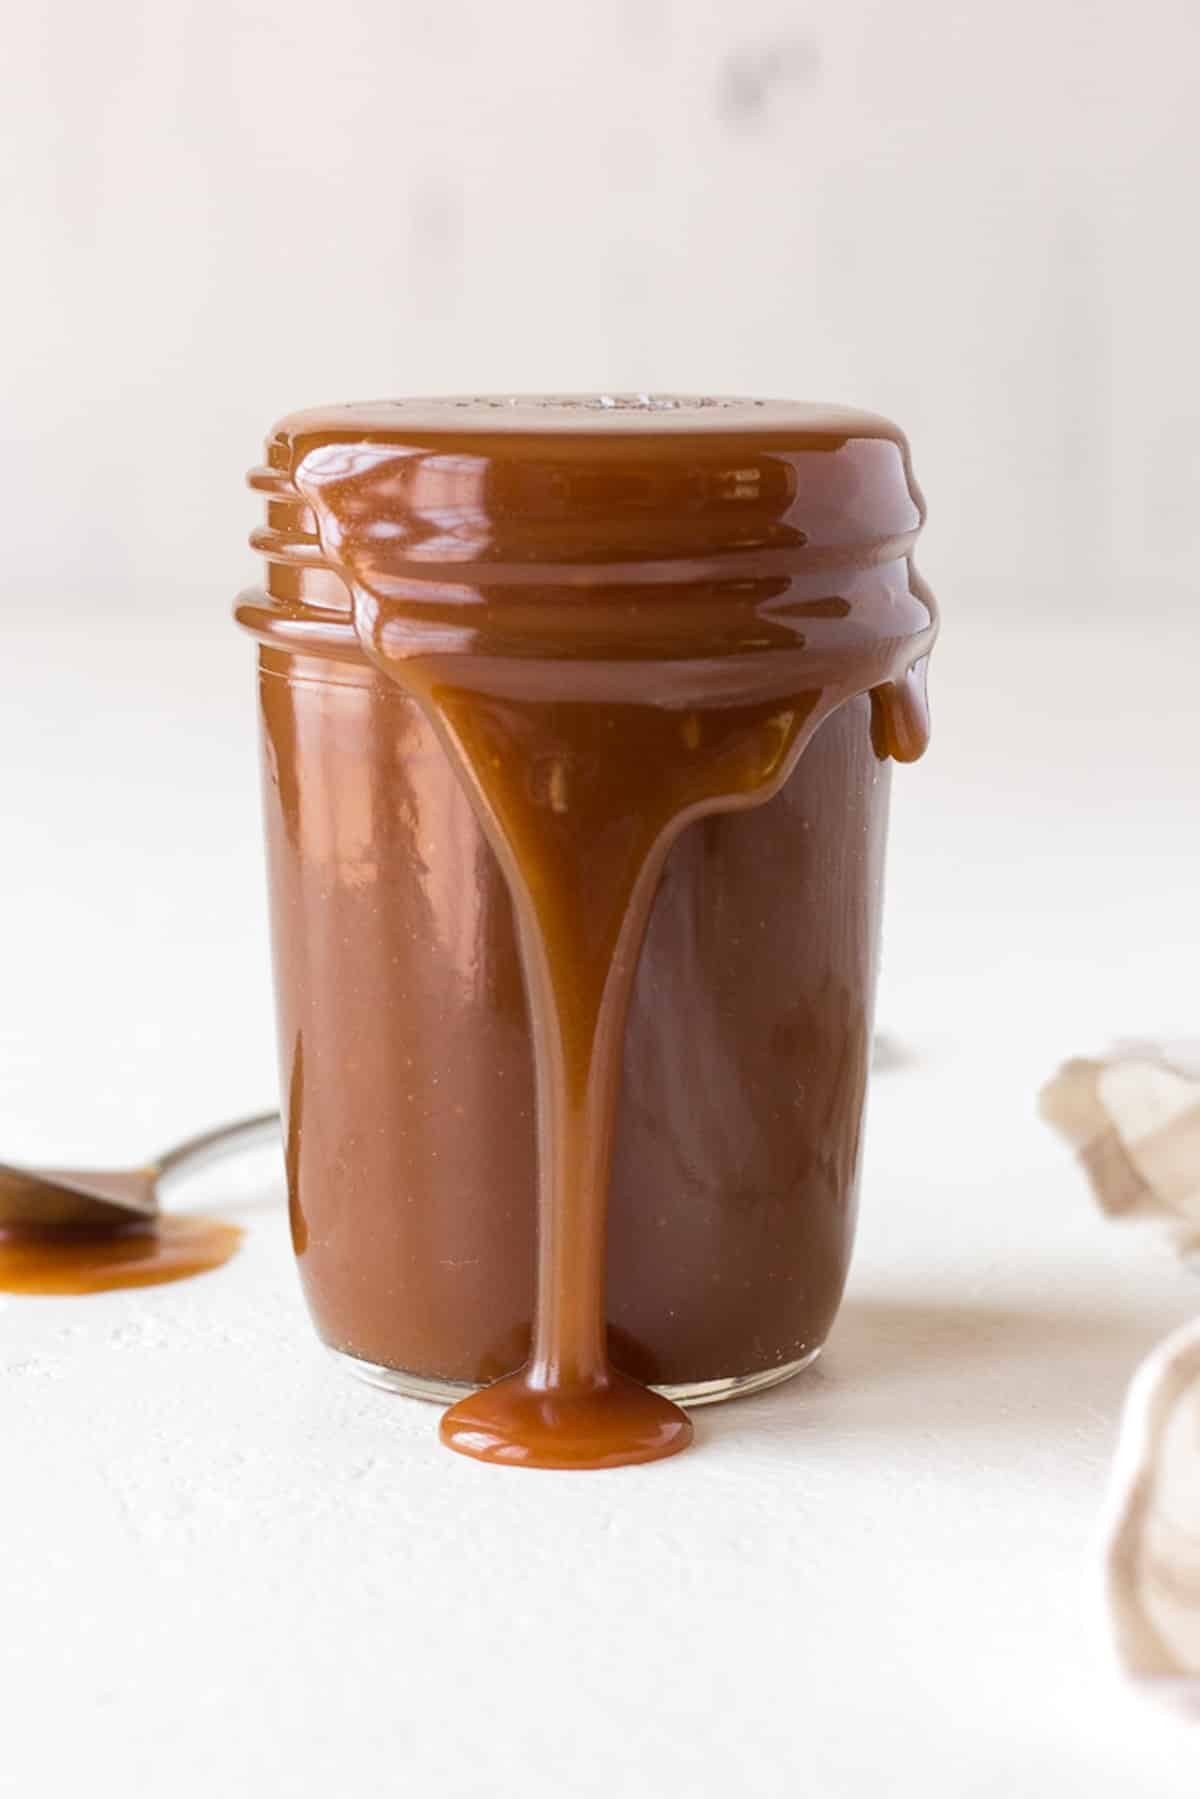 a jar of salted caramel sauce. The sauce is running over the side of the jar.